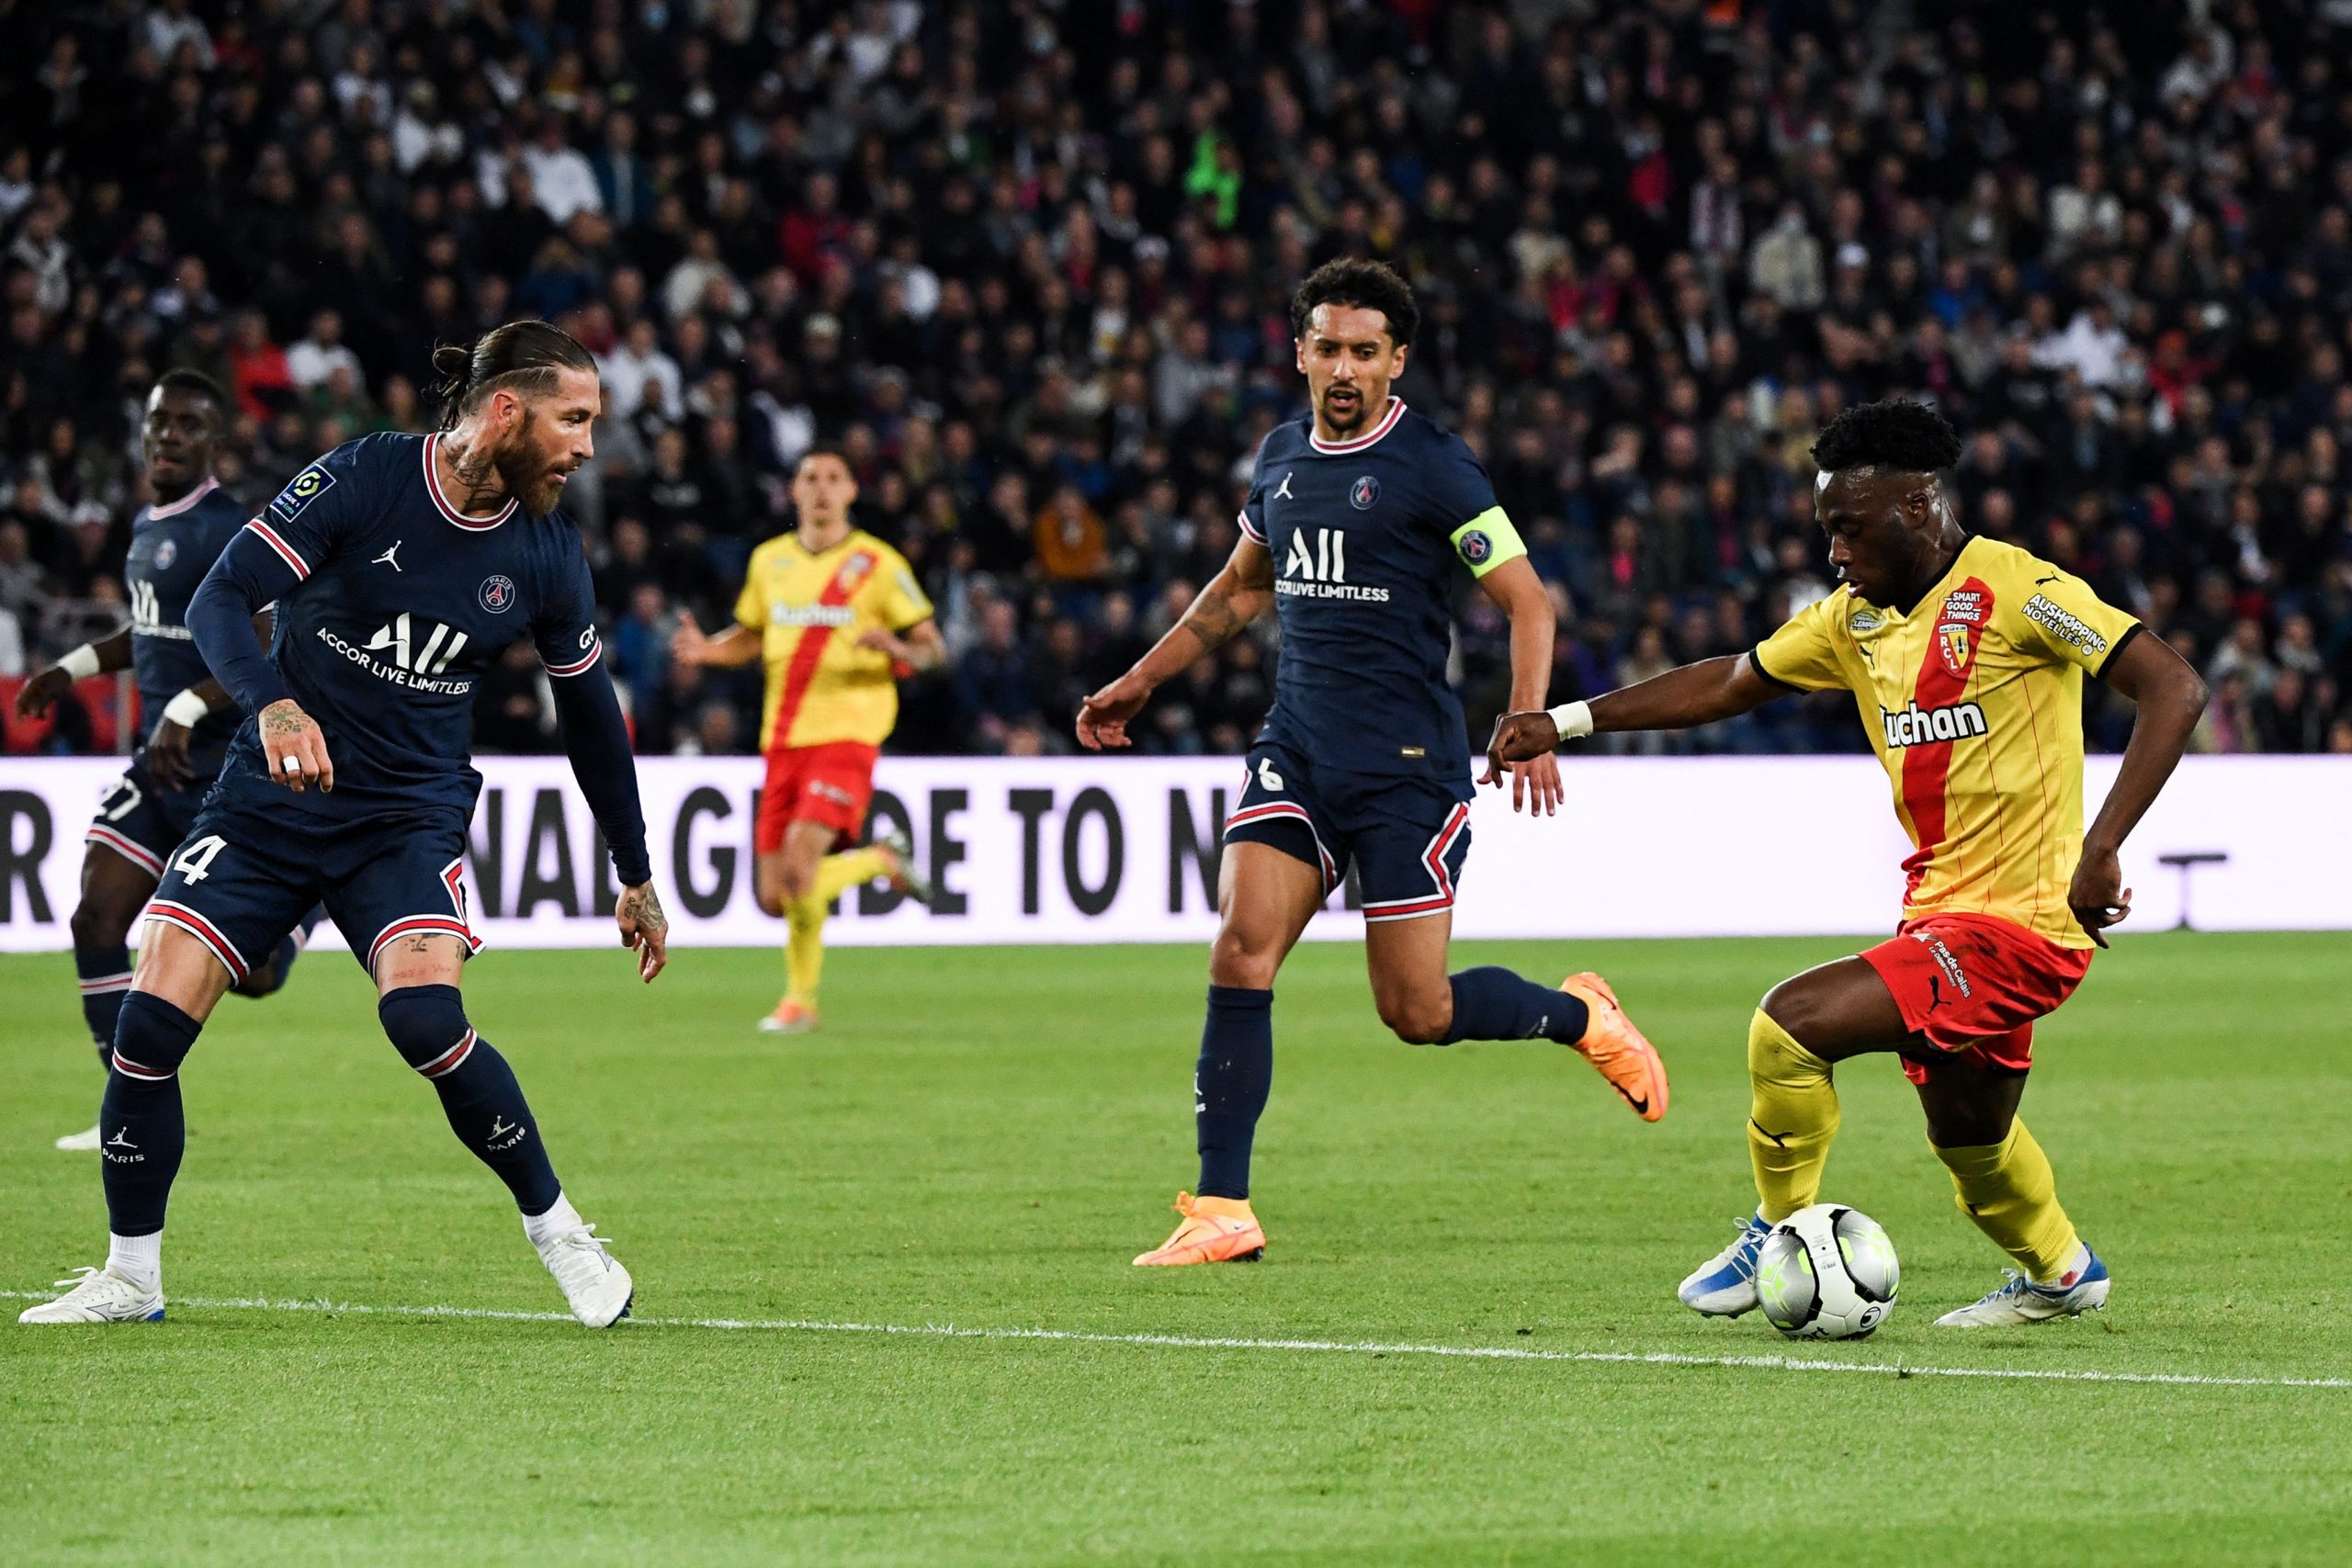 PSG win 10th Ligue 1 title with draw against Lens - Get French Football ...